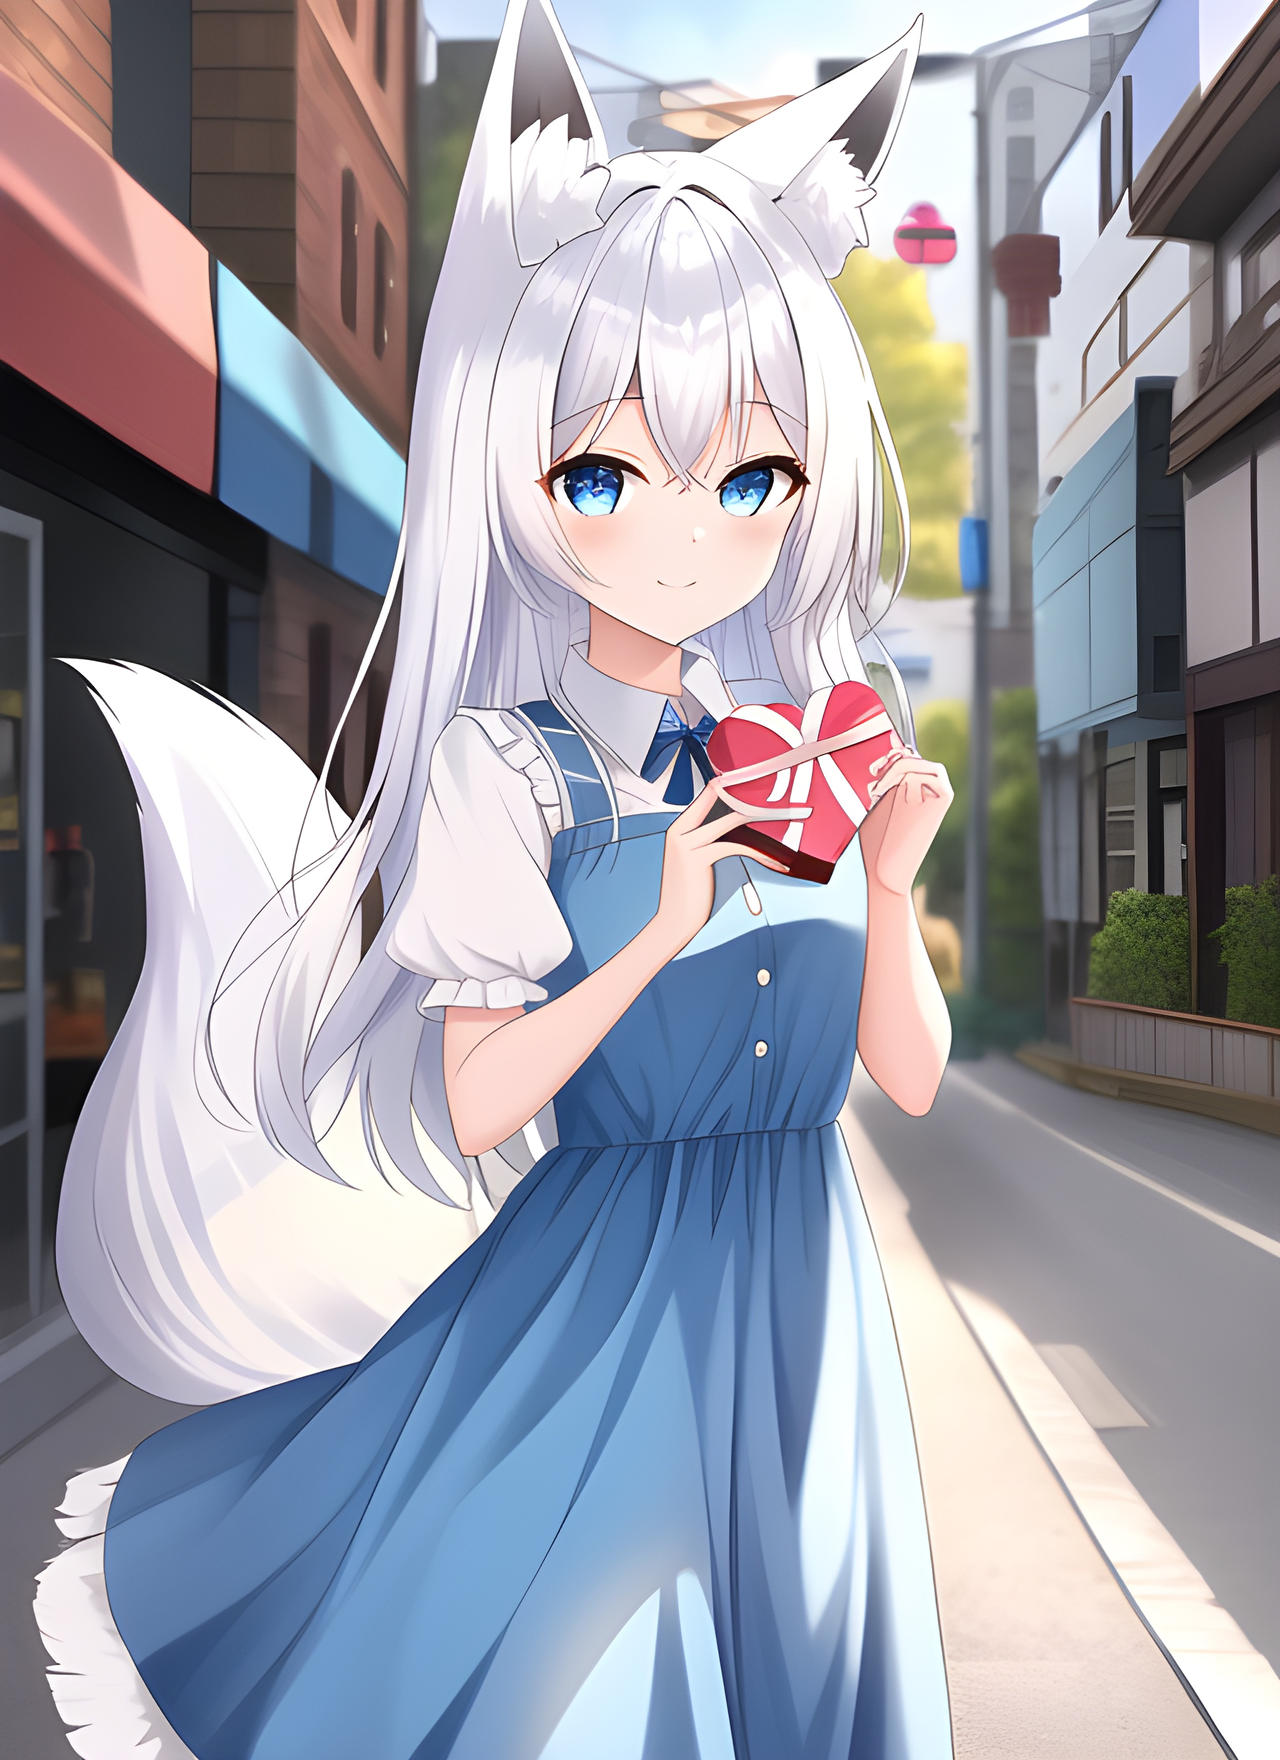 kitsune_gives_you_chocolate_for_valentine_s_day_by_imzigs_dfp6ppf-fullview.jpg